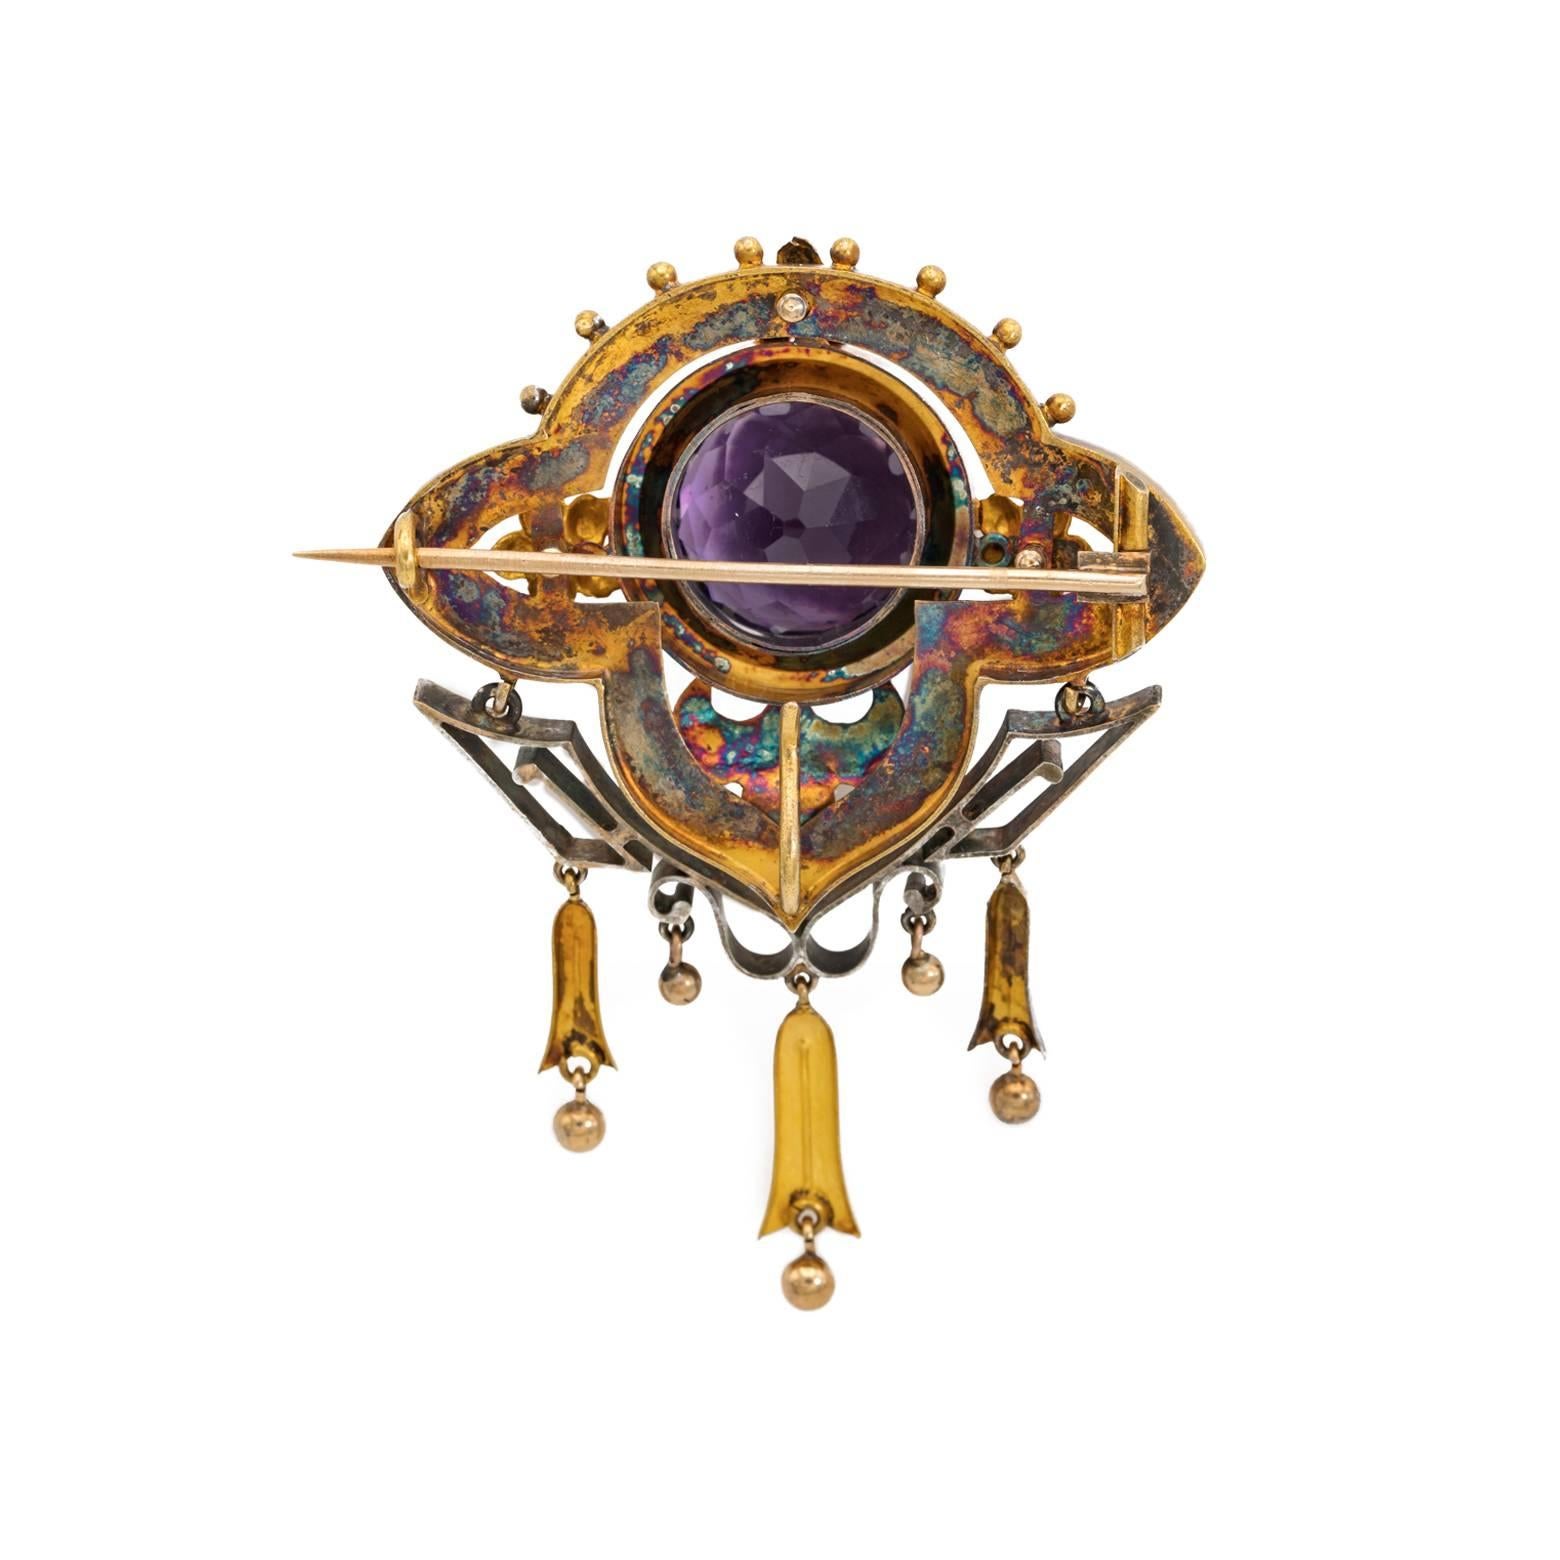 This unique and exquisite rose gold and amethyst brooch speaks volumes of history and art. The high copper content of the gold creates a beautiful rose gold with natural oxidation due to the antique age of over a hundred years. A large faceted round